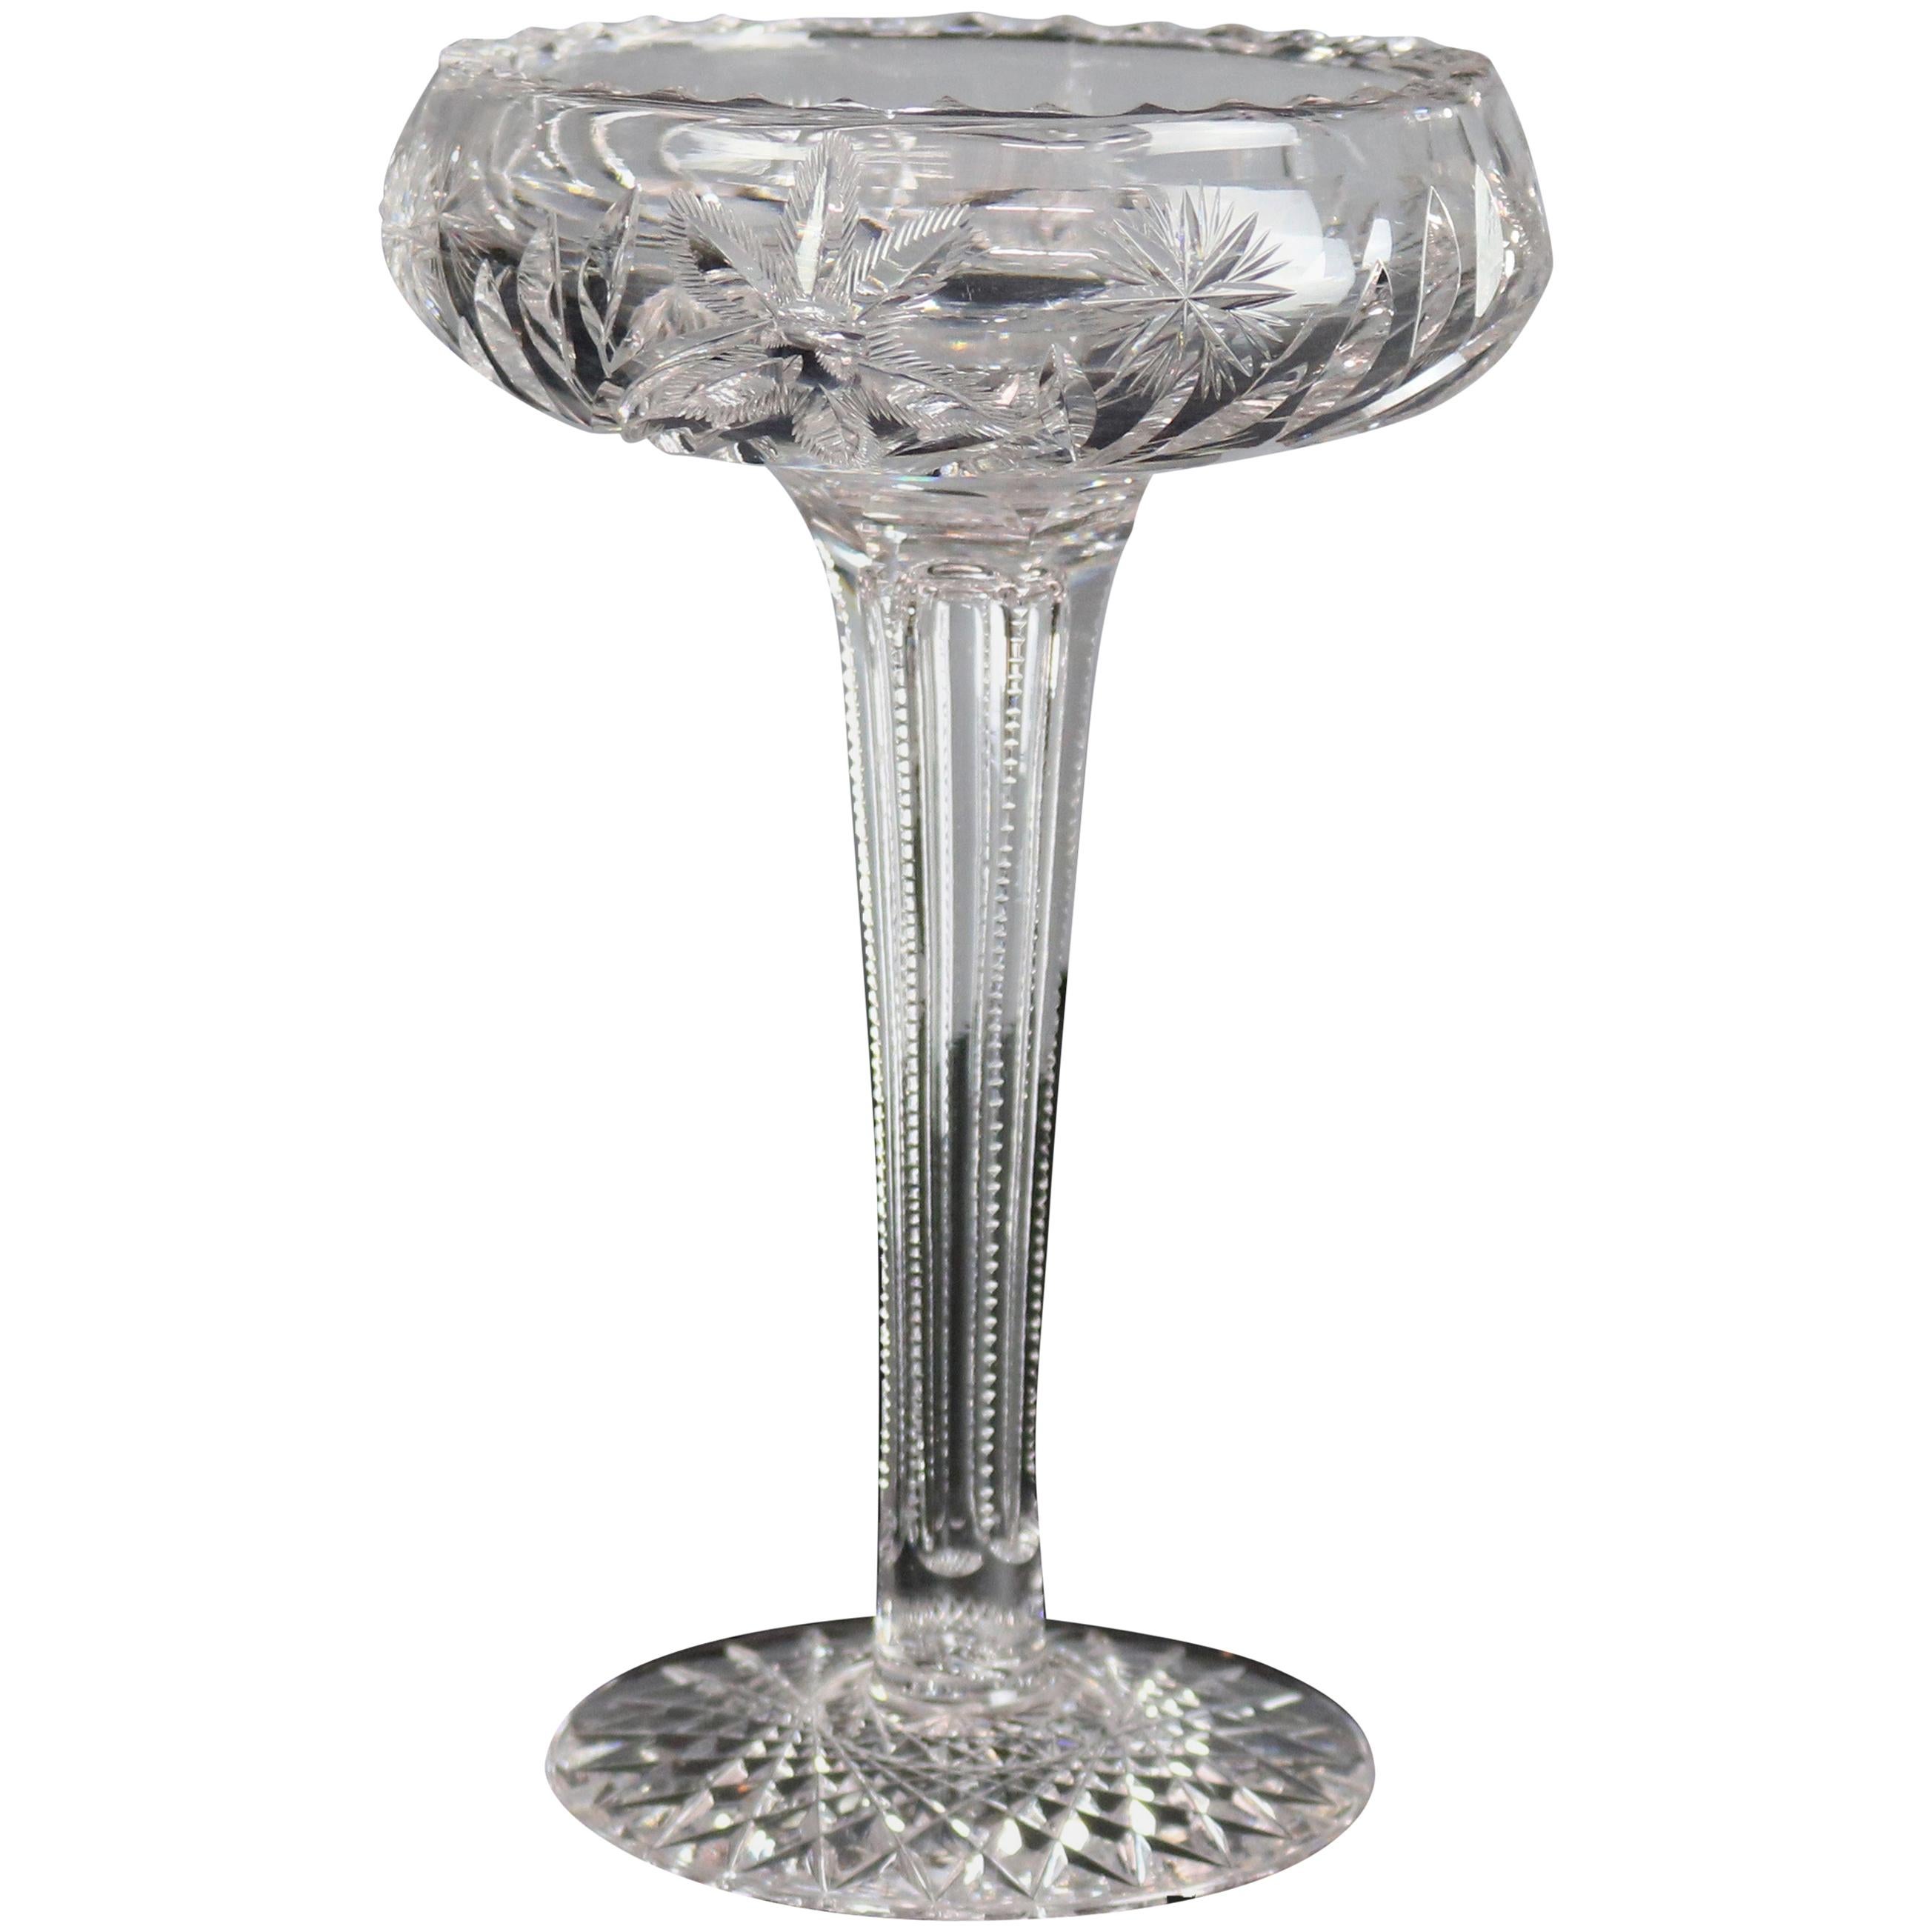 Vintage American Brilliant Cut Glass Tall Floral Compote, circa 1940 For Sale